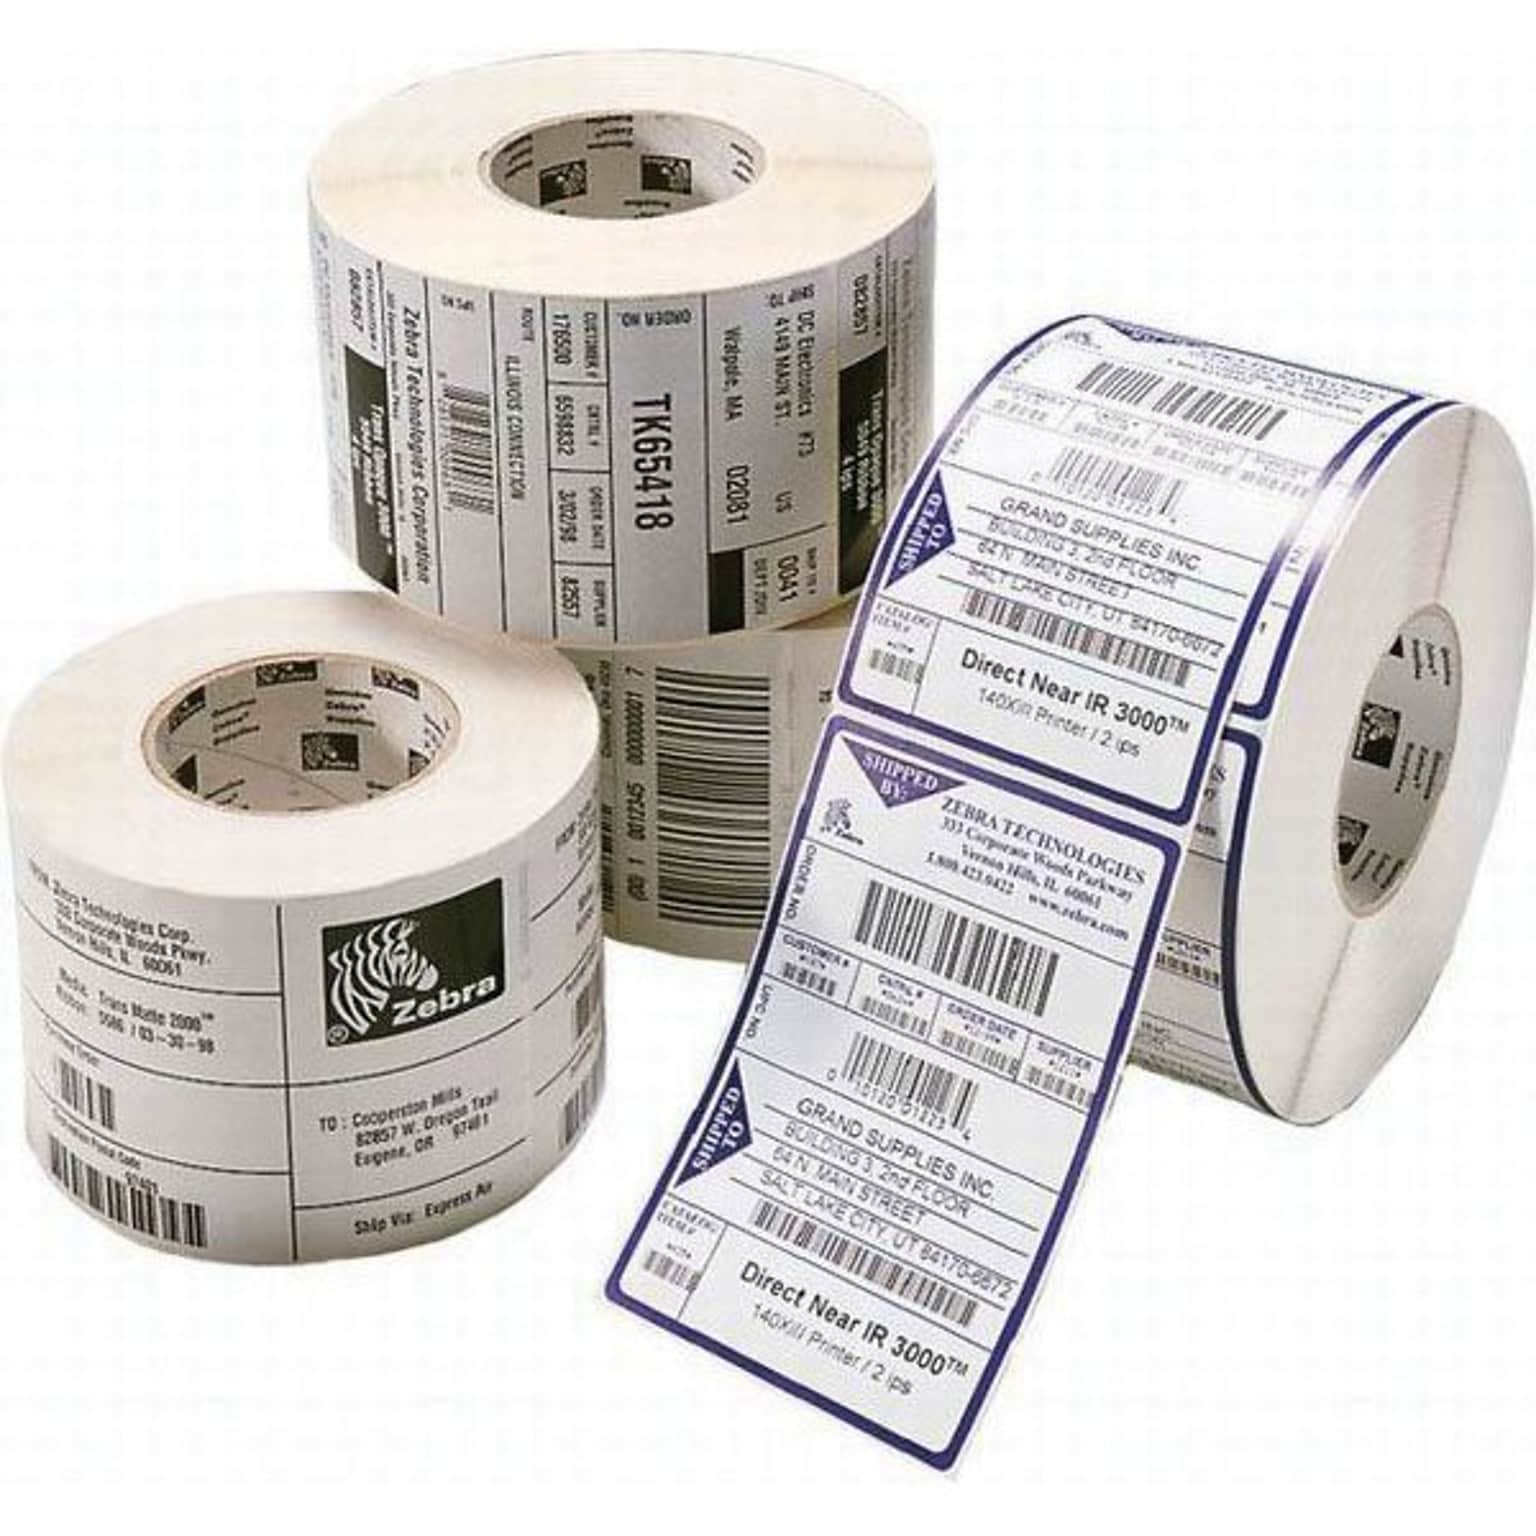 Zebra Z-Select 4000T Thermal Transfer Paper Labels, 4 x 1, White, 2,260 Labels/Roll, 4 Rolls/Pack (83340)